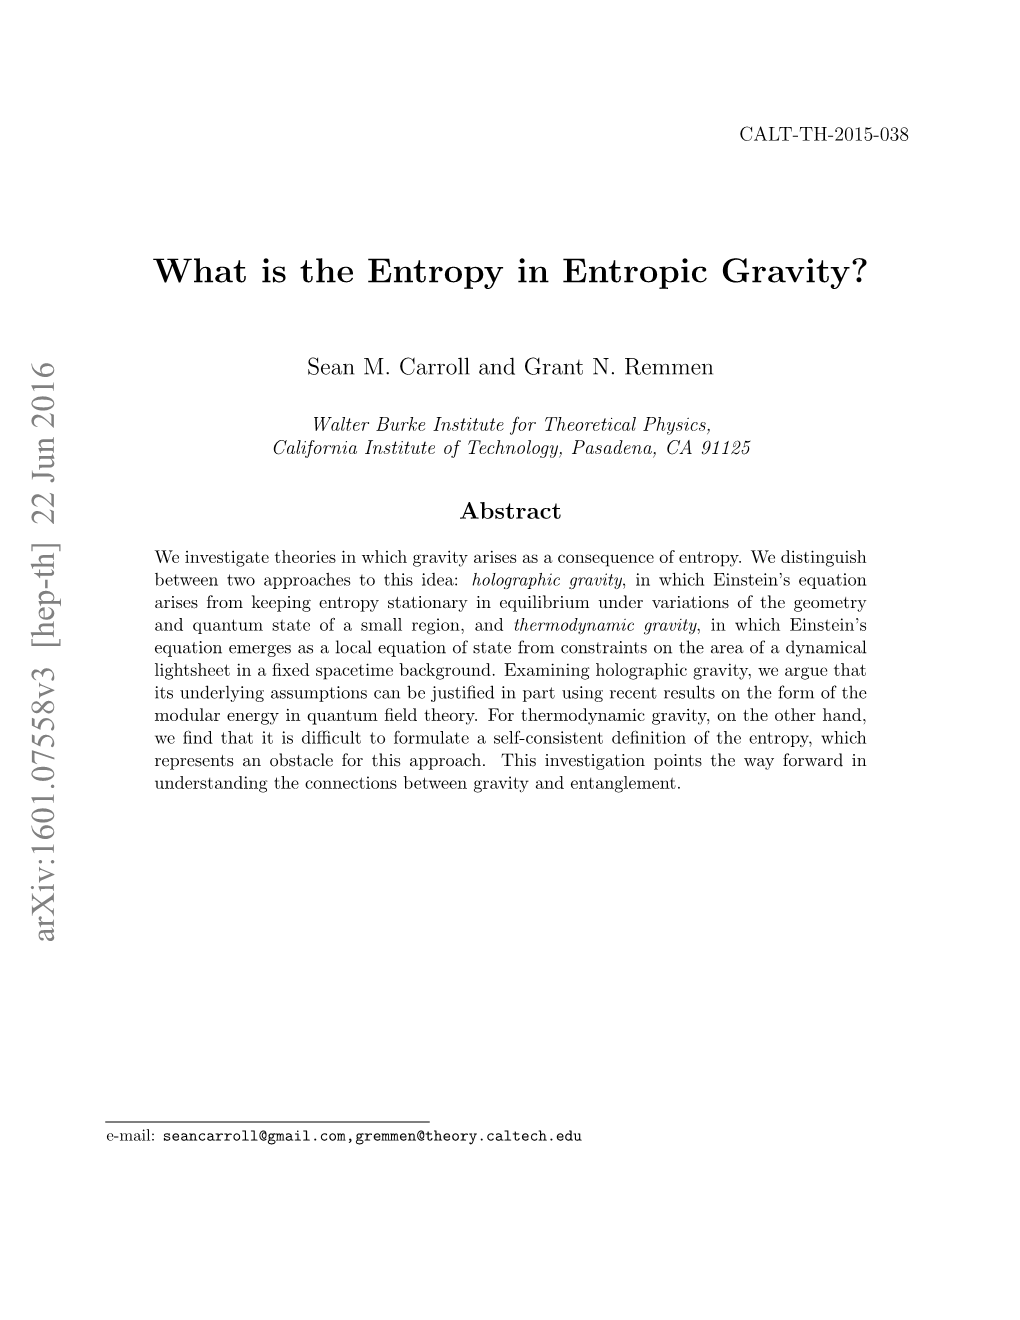 What Is the Entropy in Entropic Gravity?